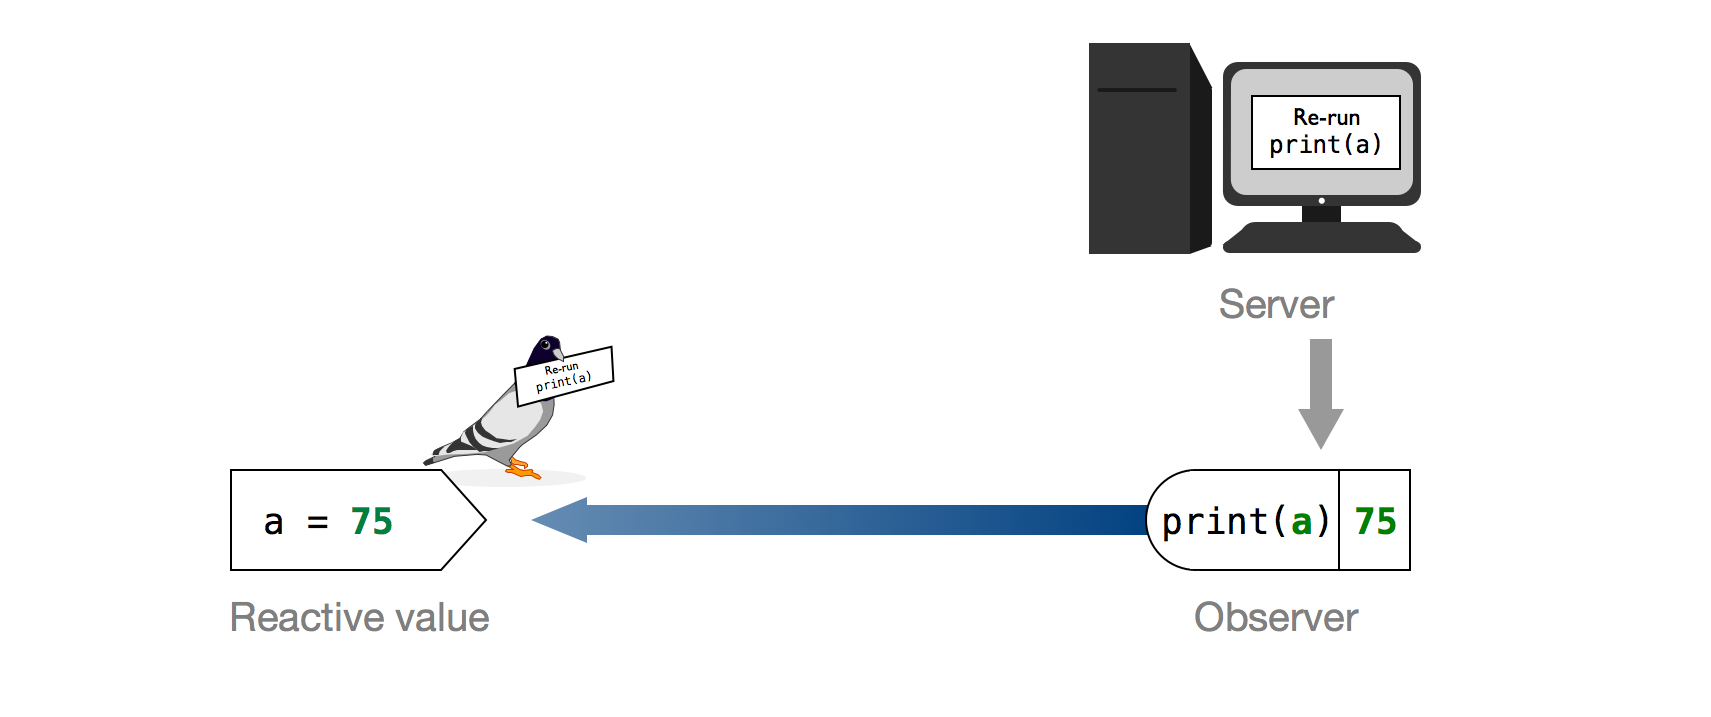 Image of Reactive value, Observer and Server. Value of reactive value is 75. Pigeon holding card saying Re-run print(a) is next to Reactive value. Re-run print(a) is on the server. Arrow points to Observer. Now Observer says print(a) 75 instead of print (a) 50.